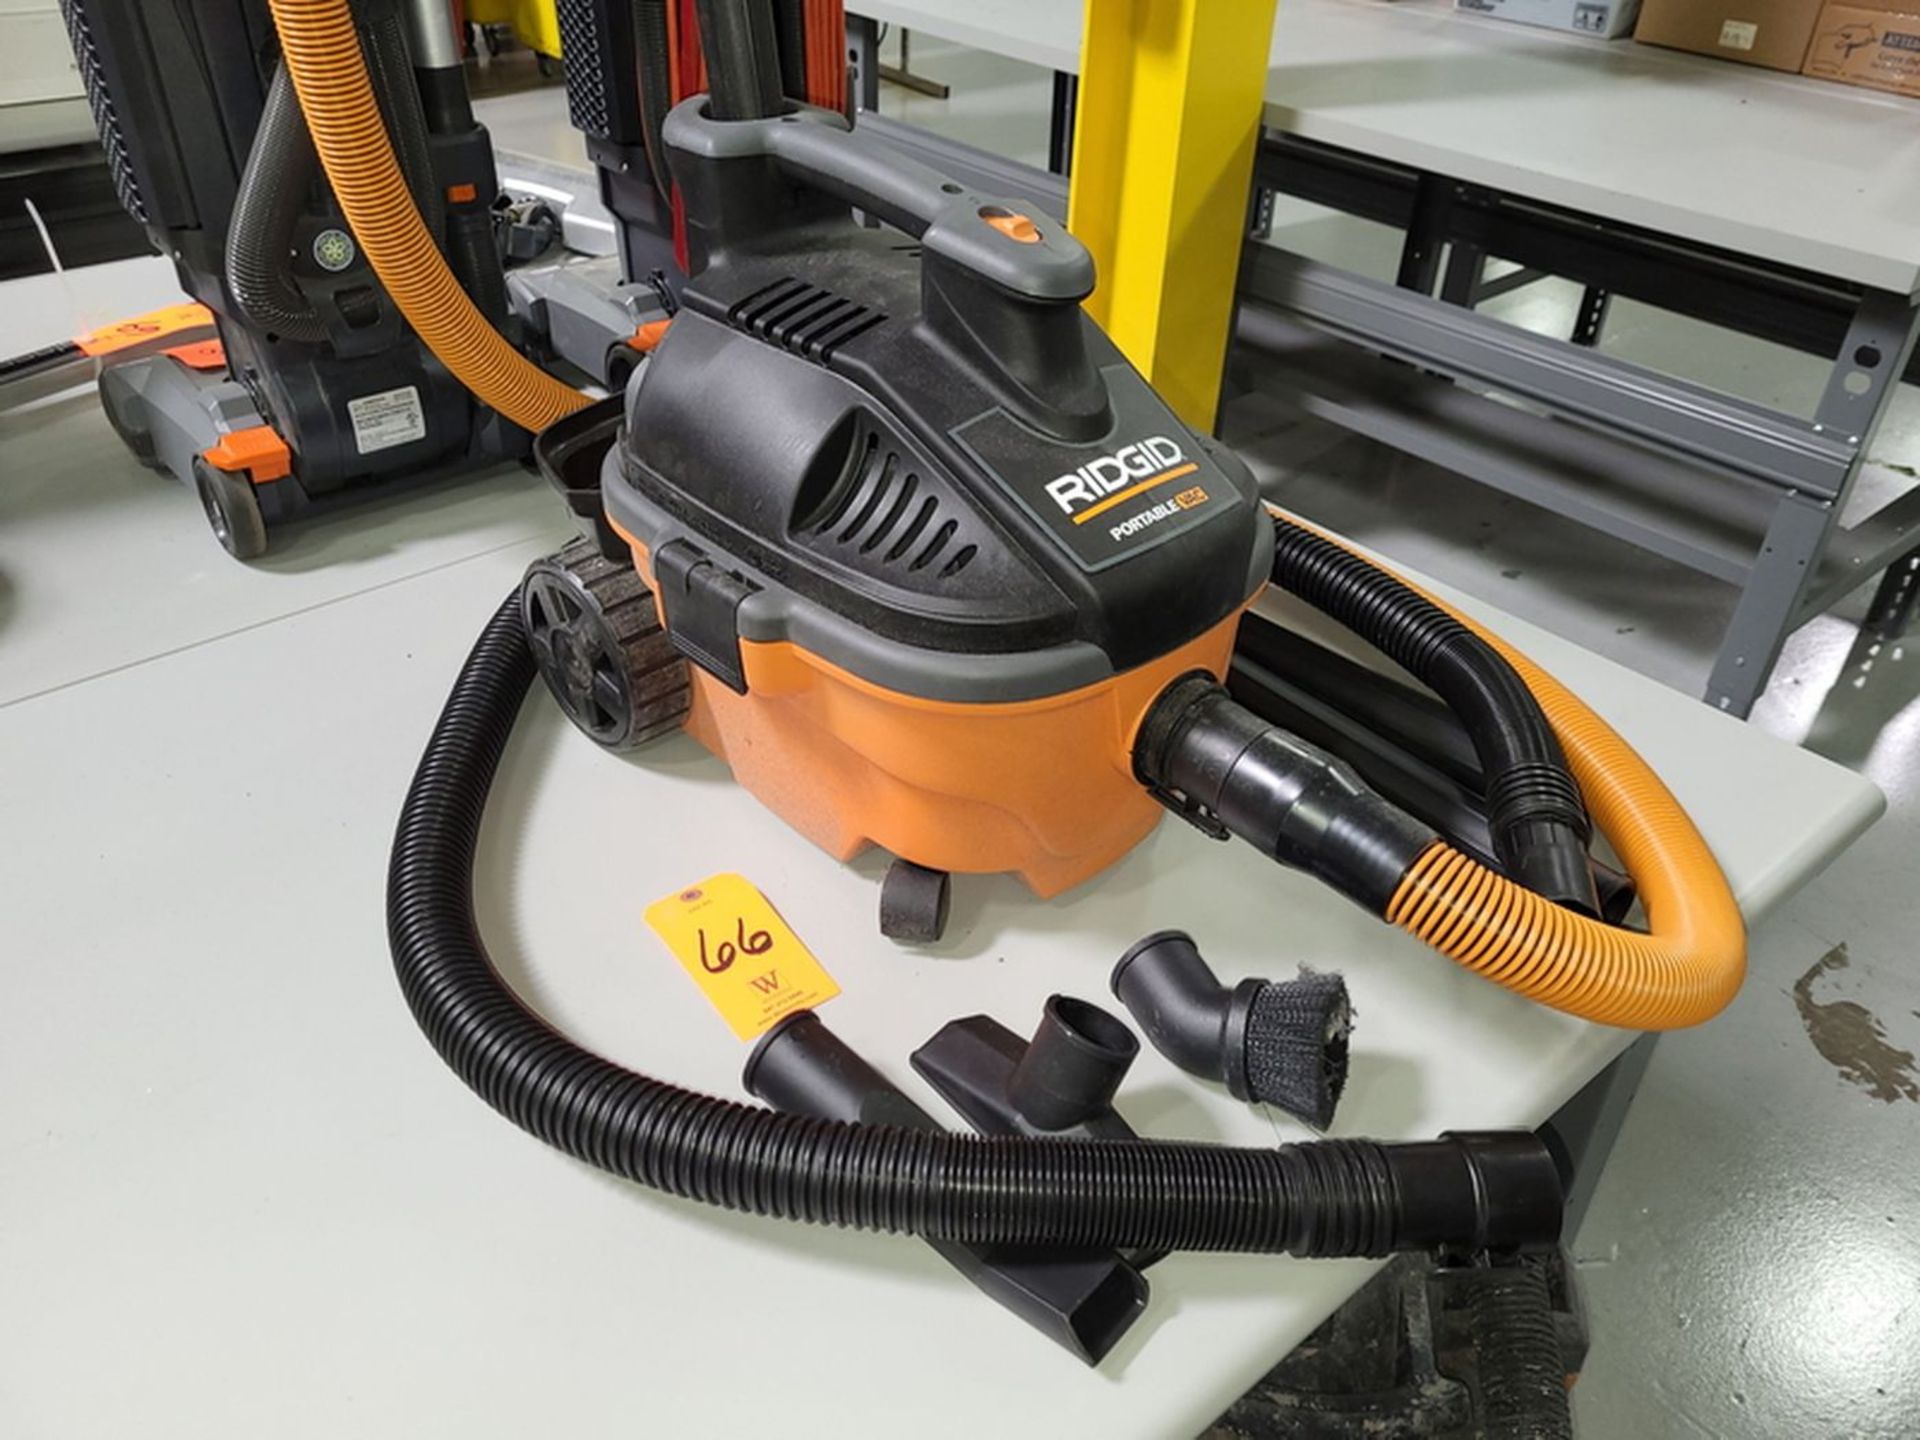 Ridgid Portable Shop Vacuum; with Related Attachments